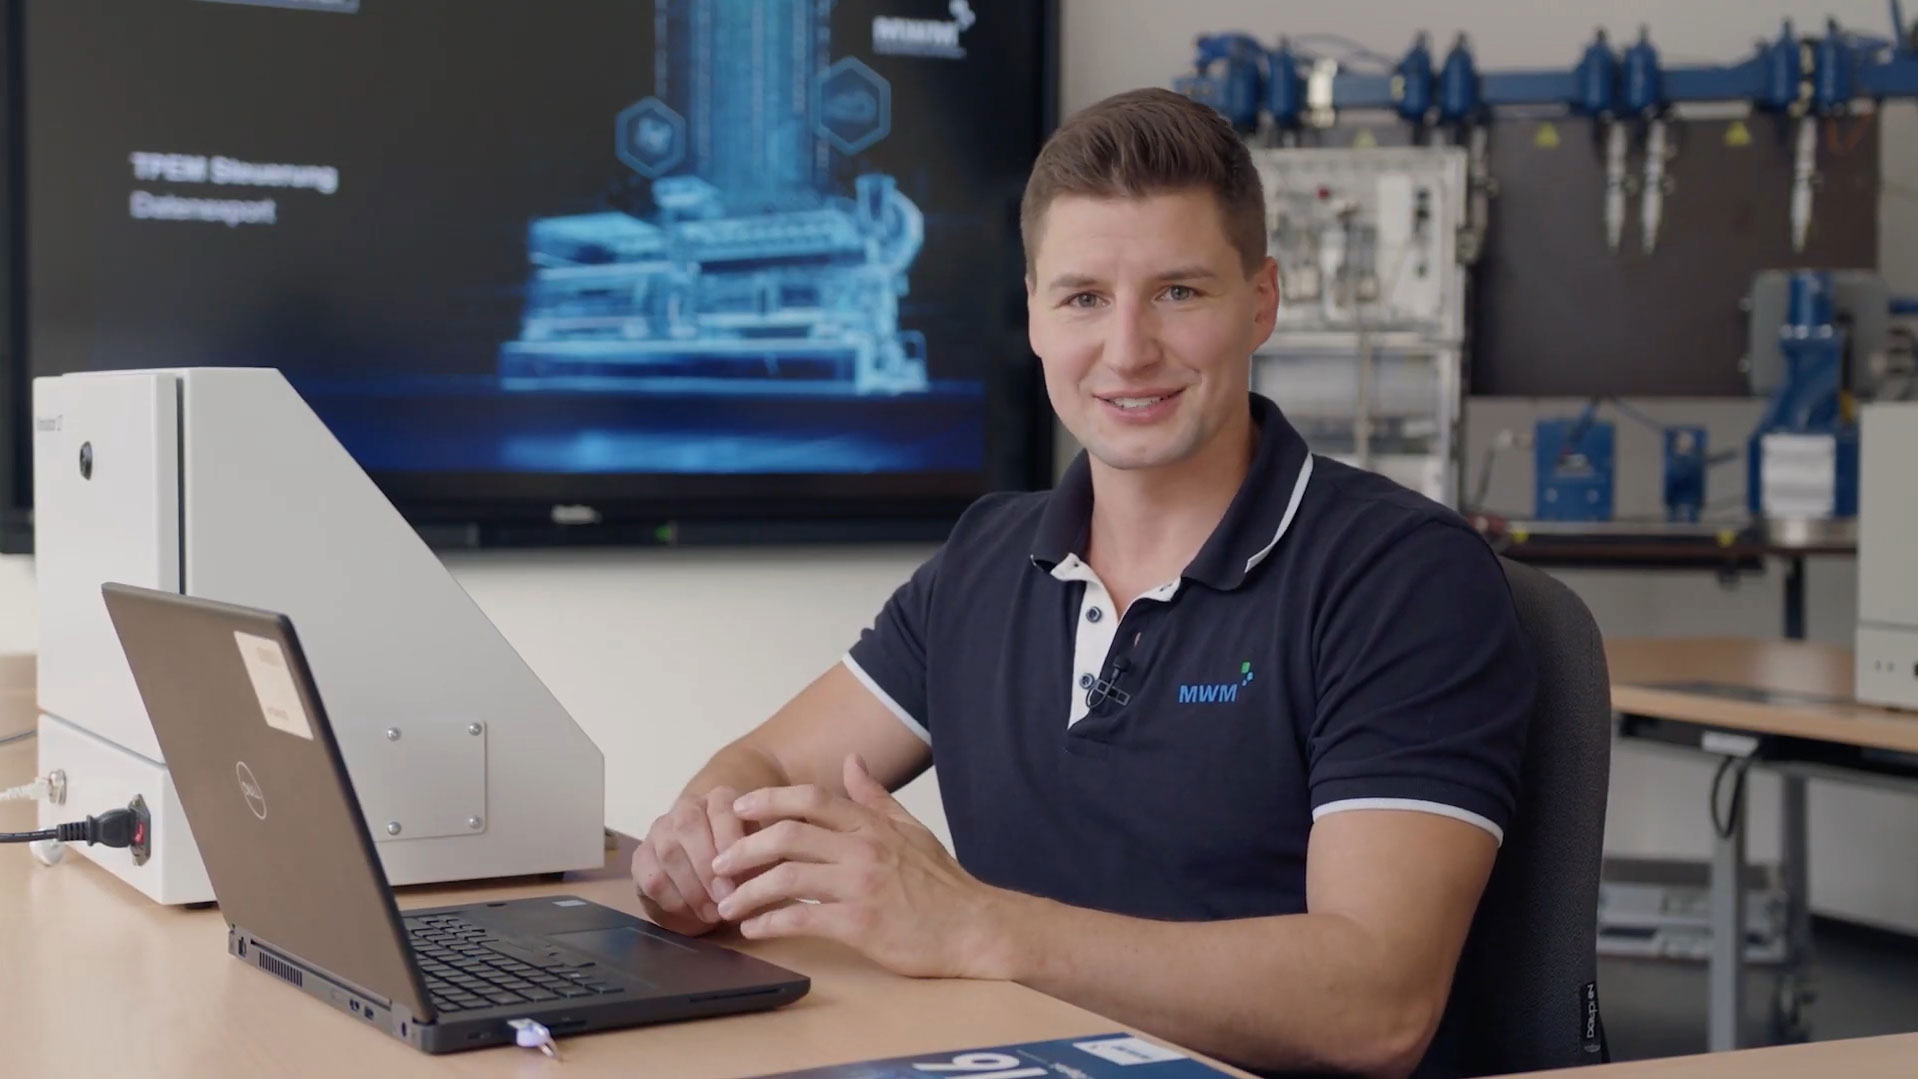 In the video, Alexander Klotz, Technical Trainer at the MWM Training Center Service in Mannheim, explains how to perform the TPEM data export correctly.